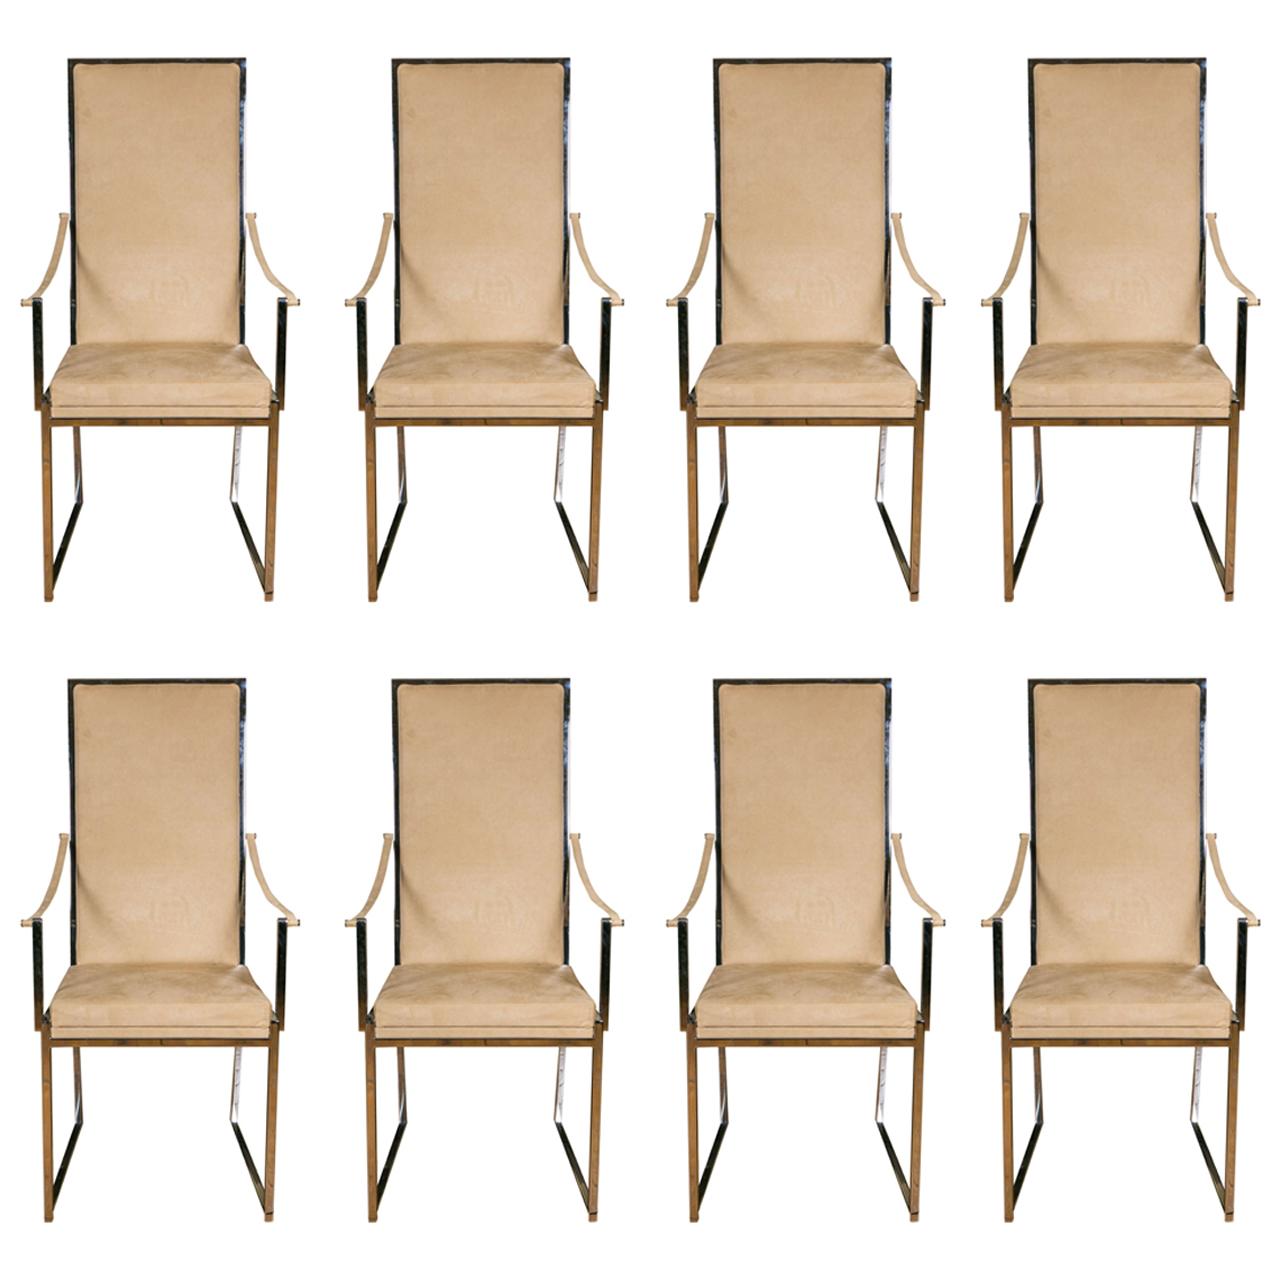 Exceptional Set of 8 Chairs at Cost Price